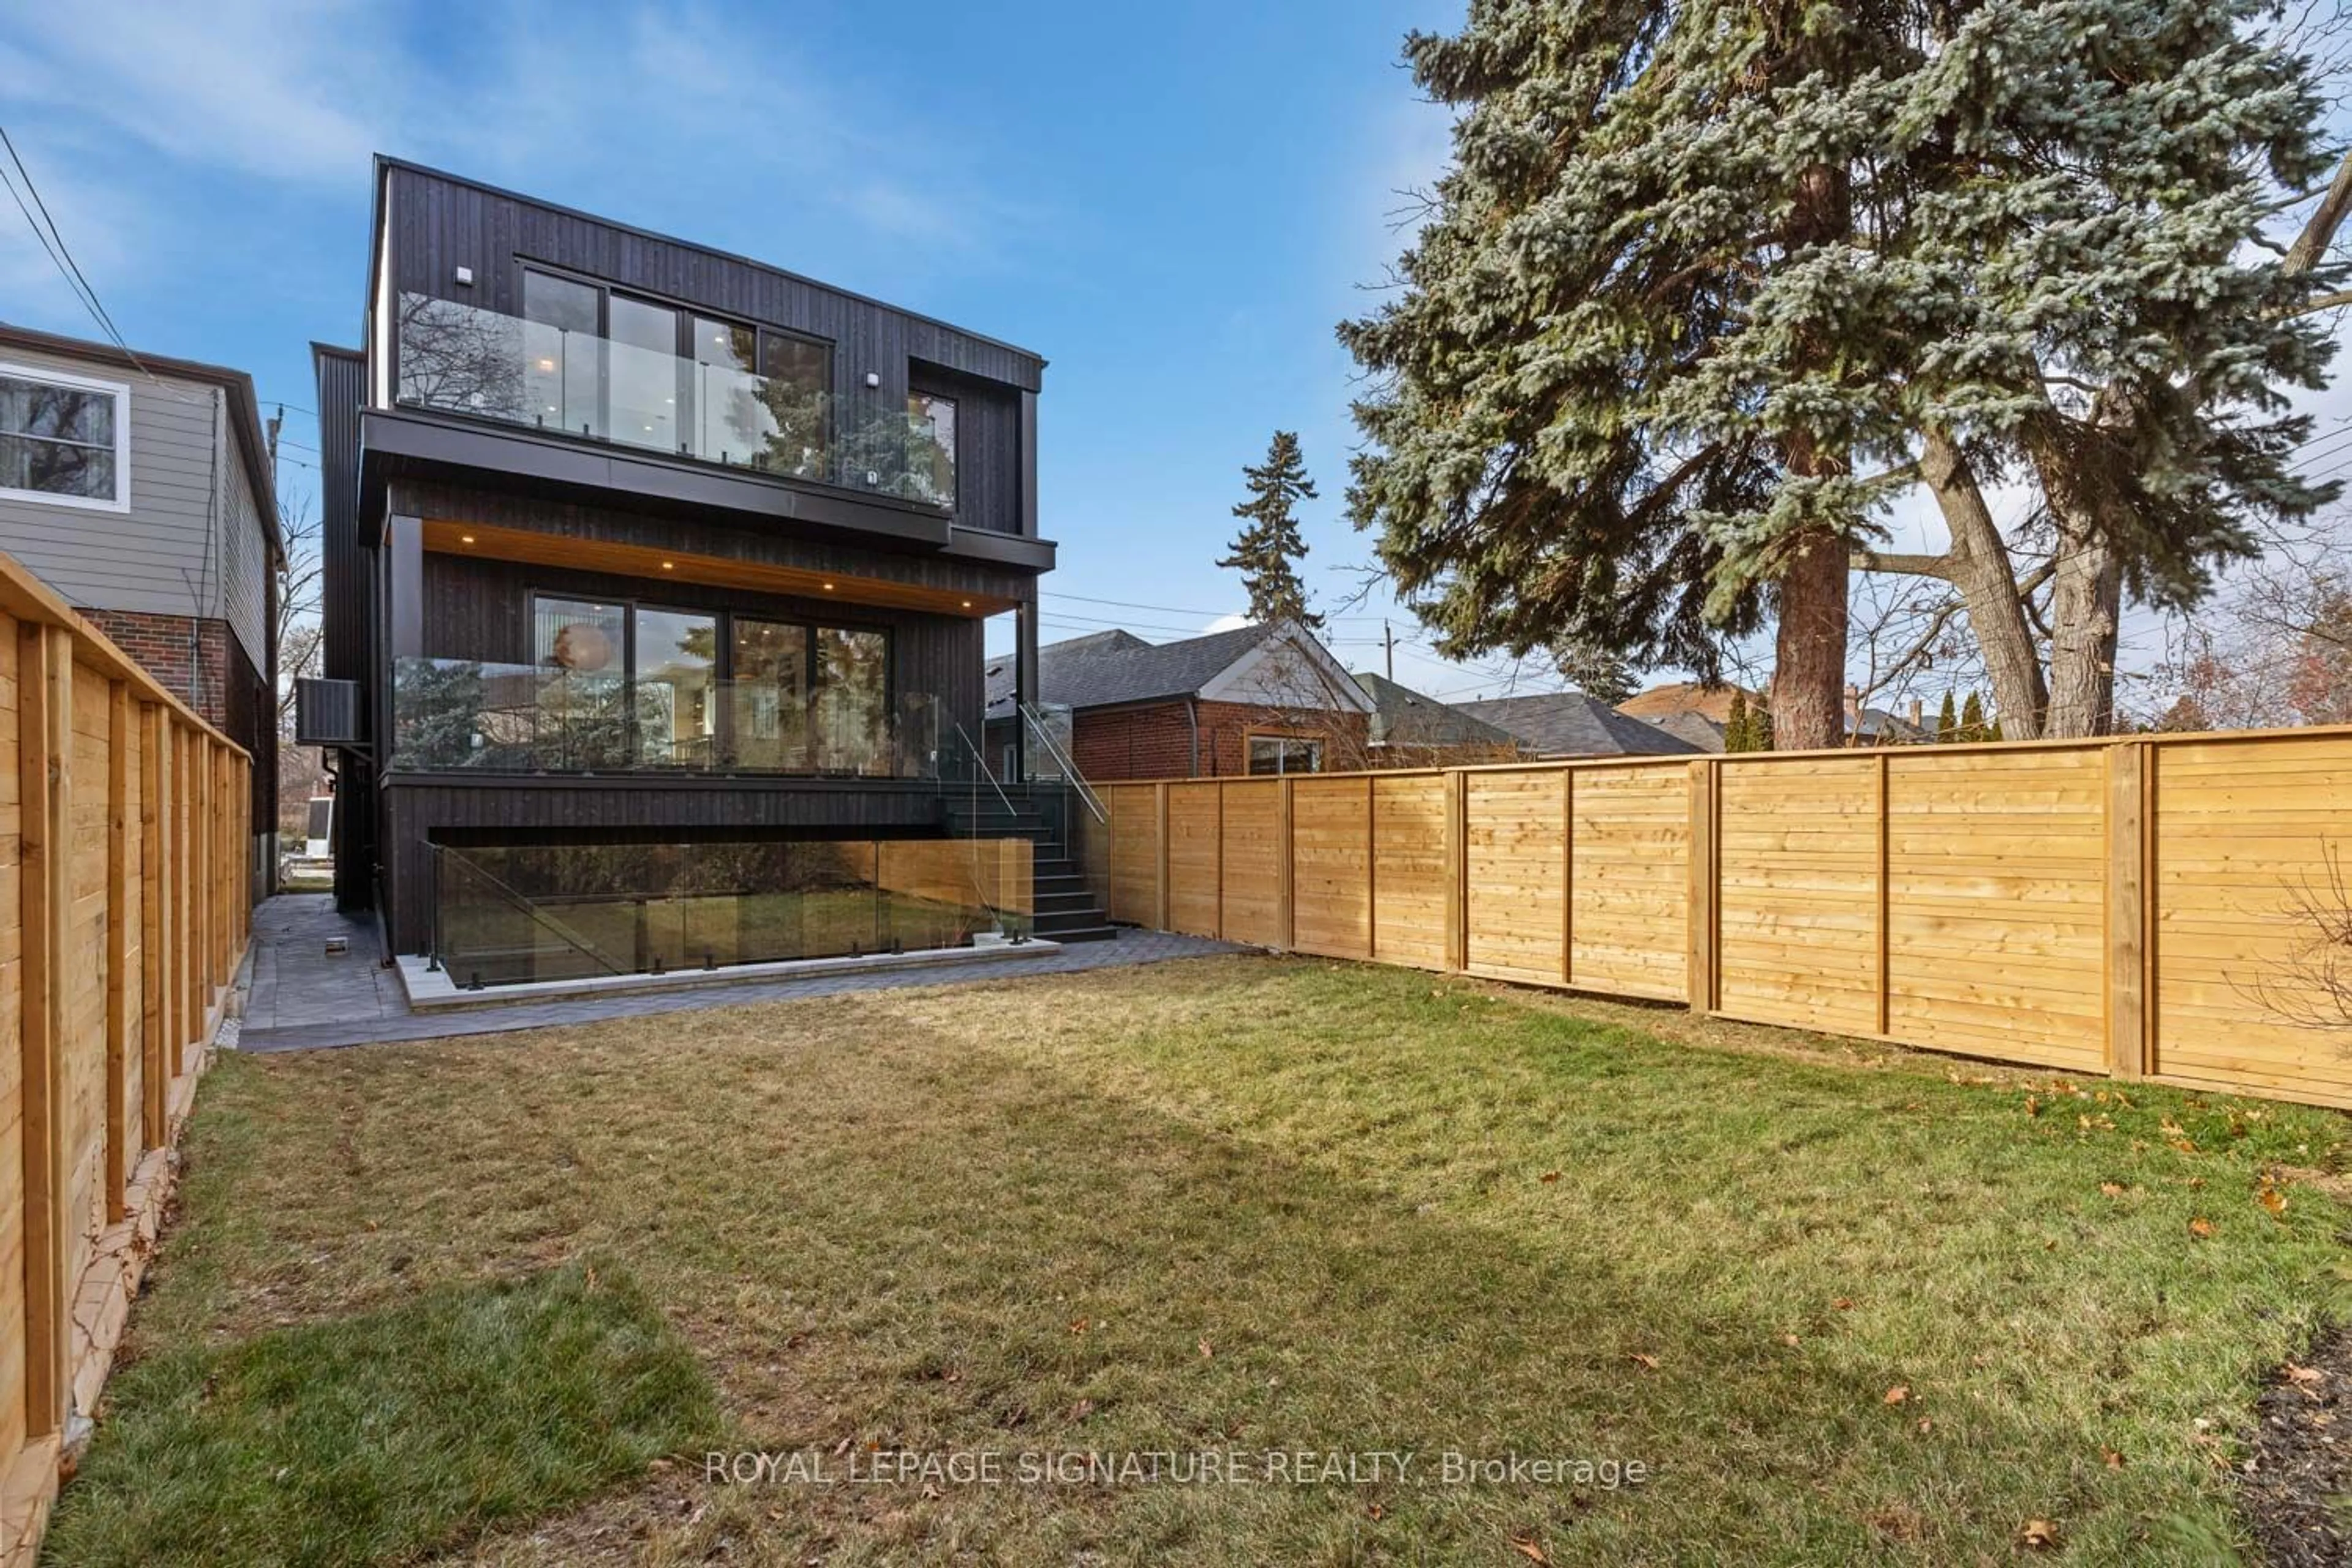 Fenced yard for 263 Blantyre Ave, Toronto Ontario M1N 2S2